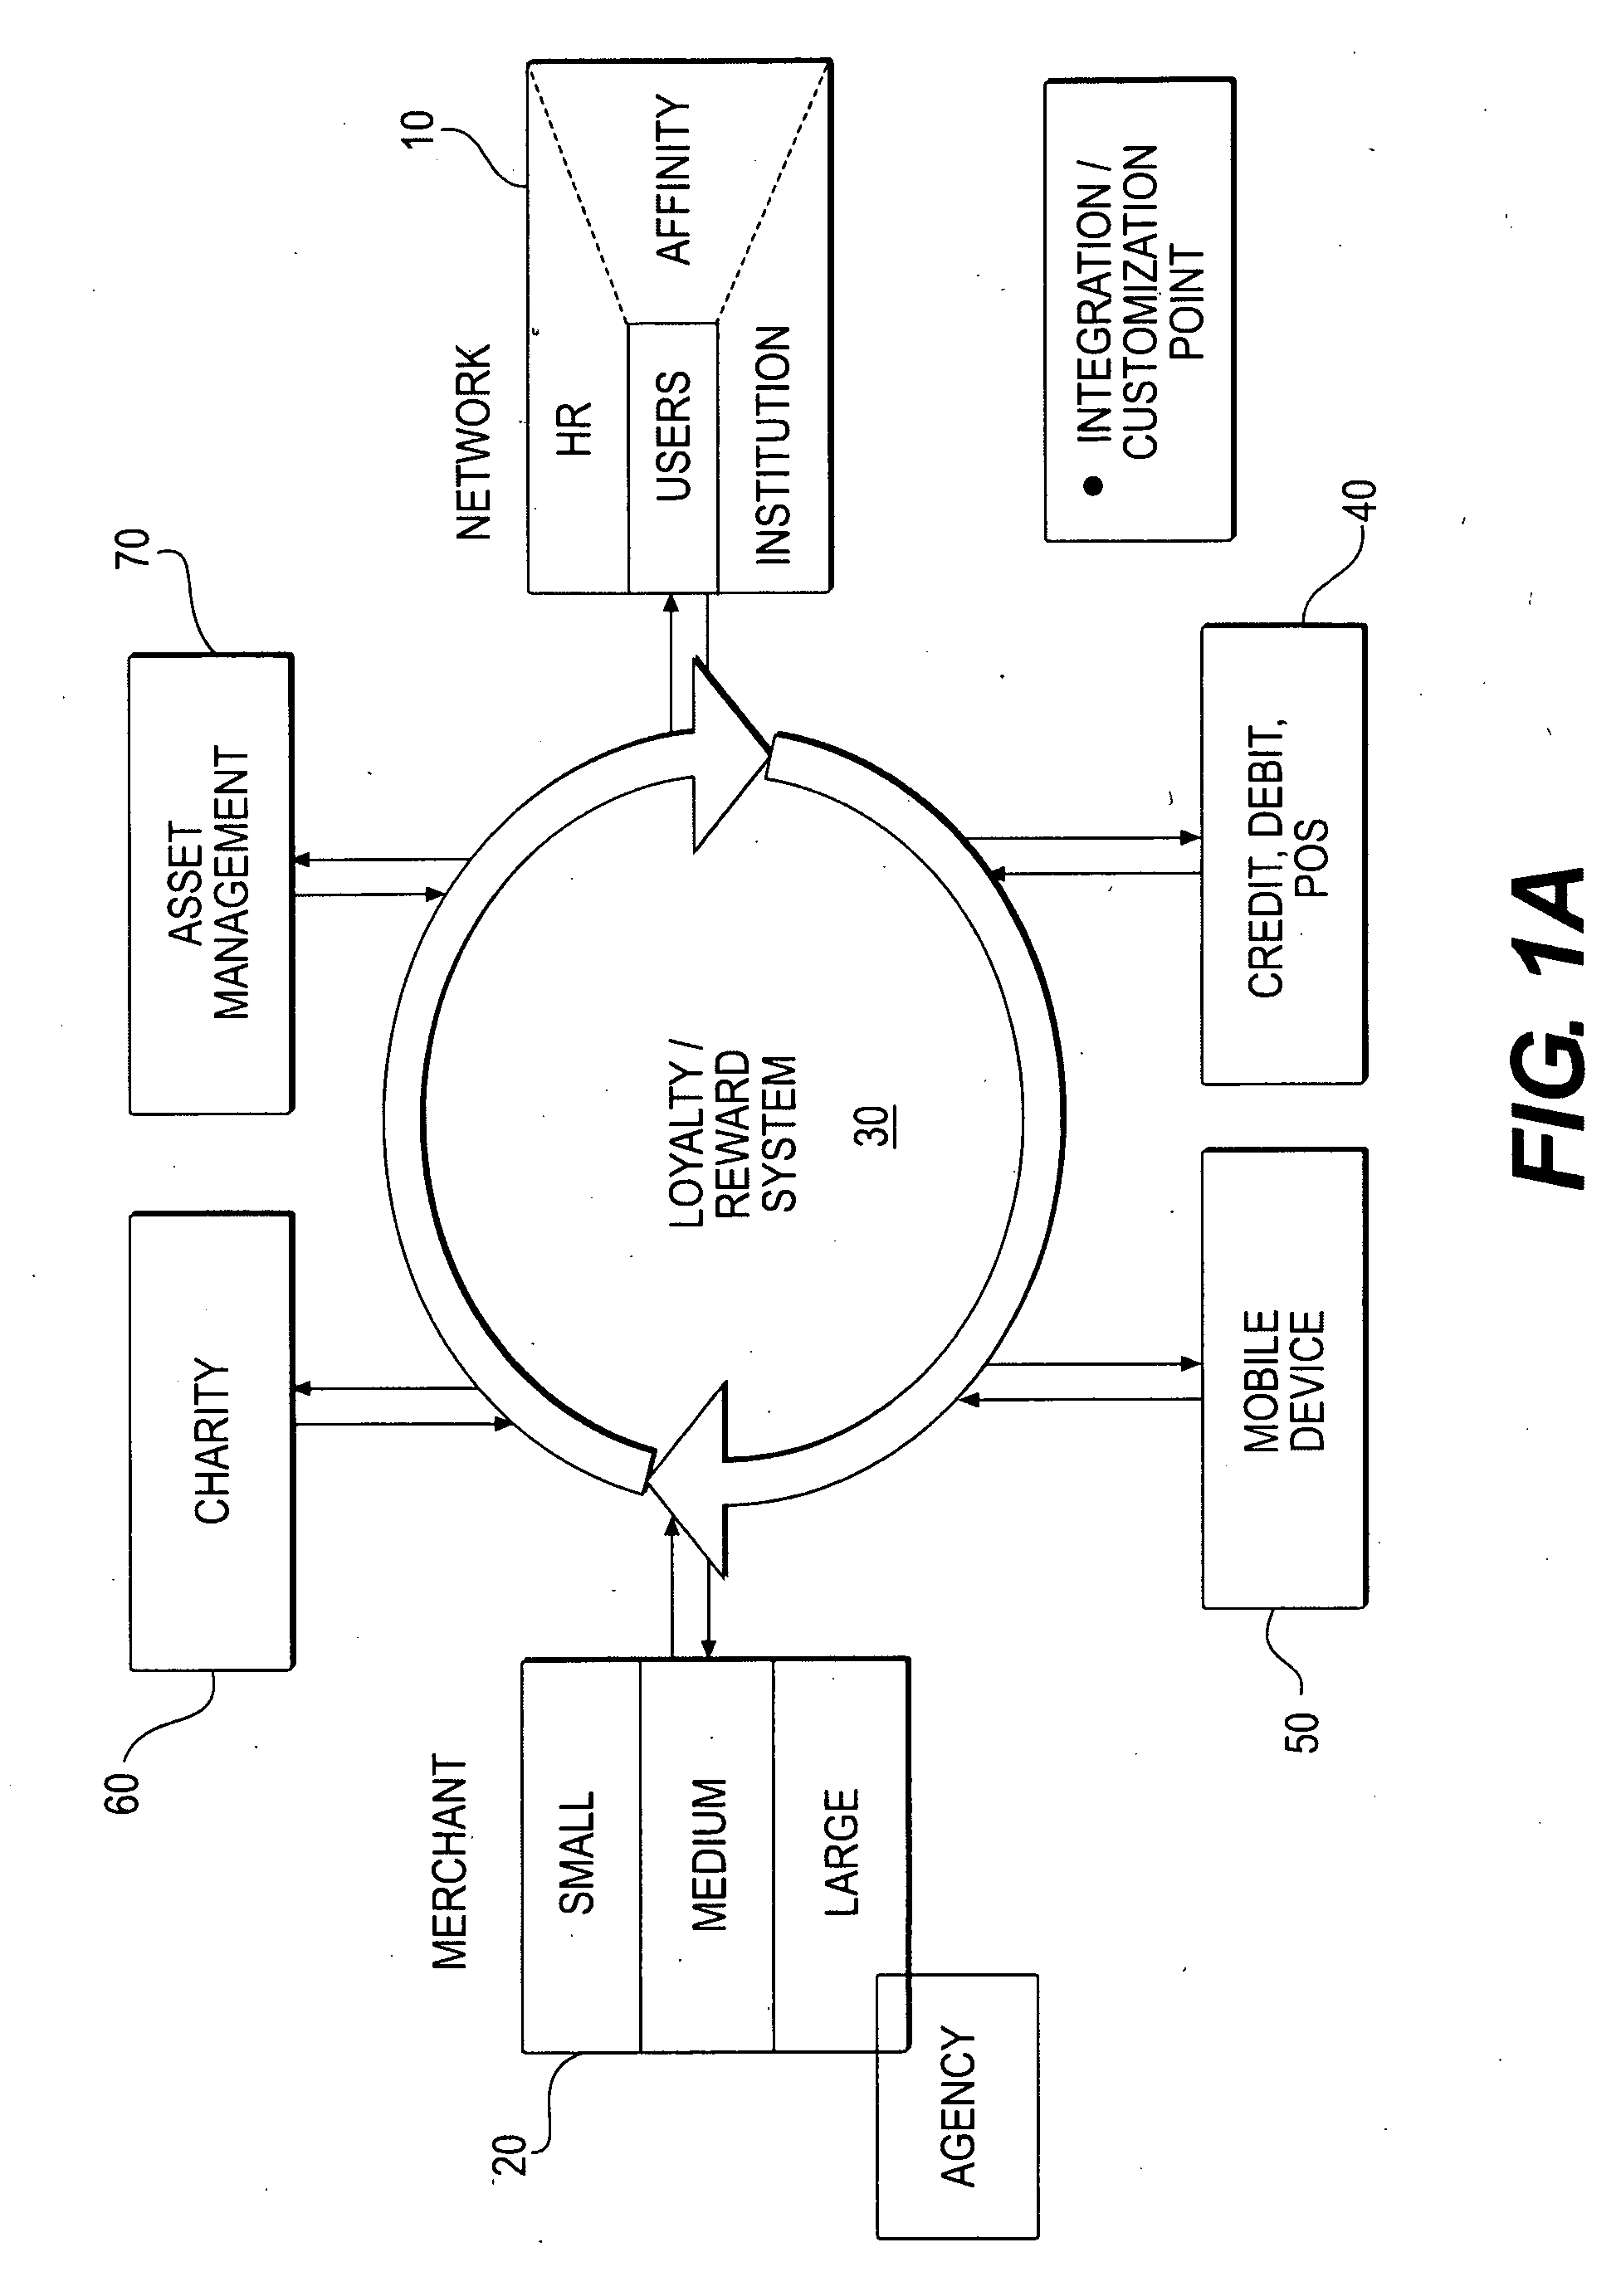 Communication system and method for narrowcasting